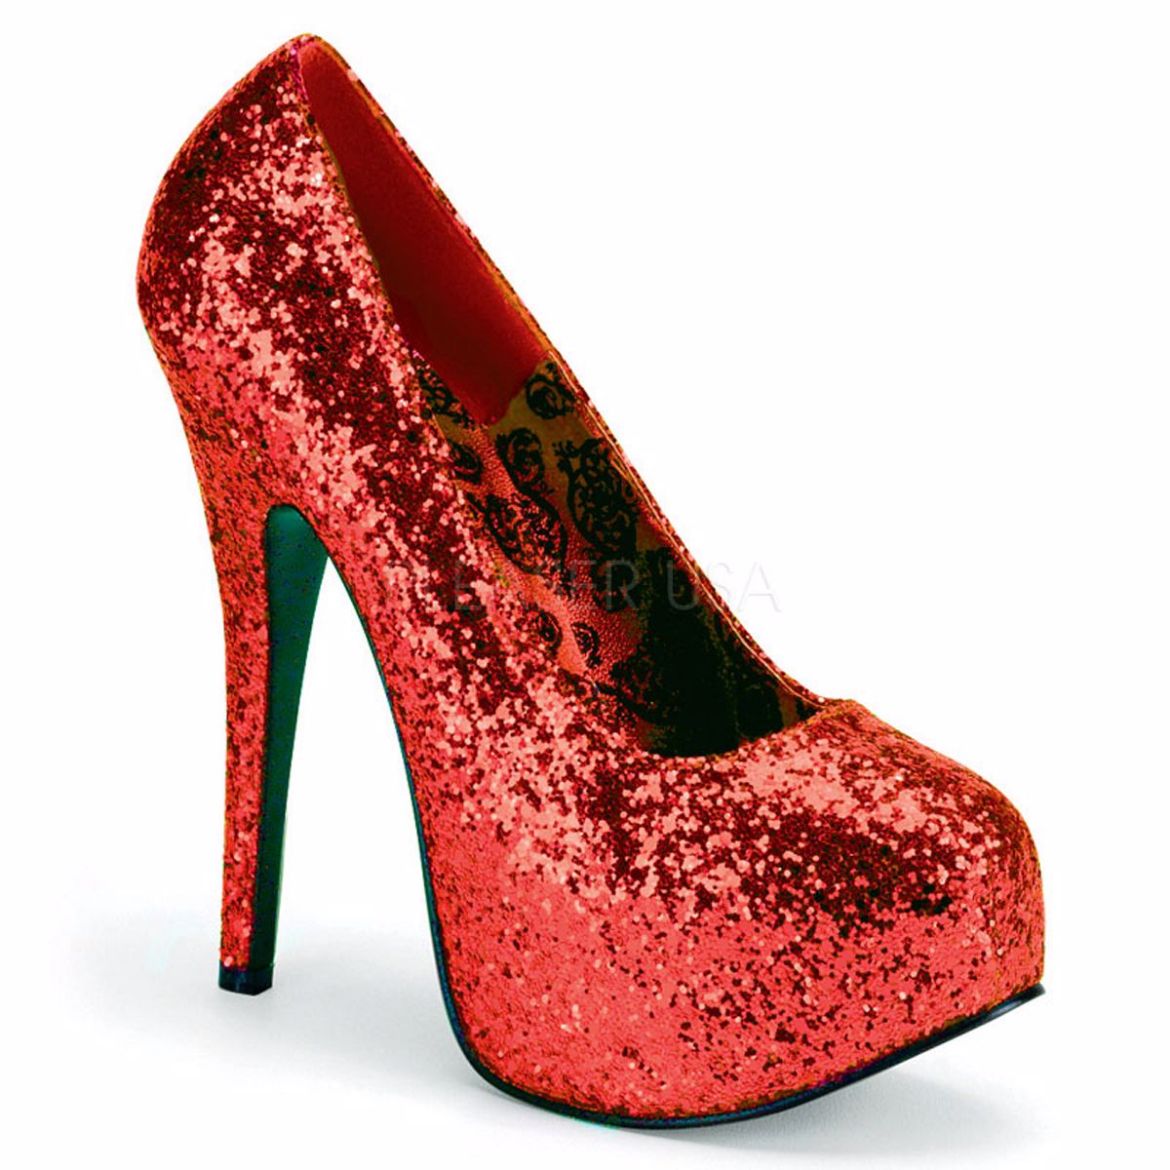 Product image of Pleaser Pink Label Teeze-06Gw Red Glitter, 5 3/4 inch (14.6 cm) Heel, 1 3/4 inch (4.4 cm) Platform Court Pump Shoes